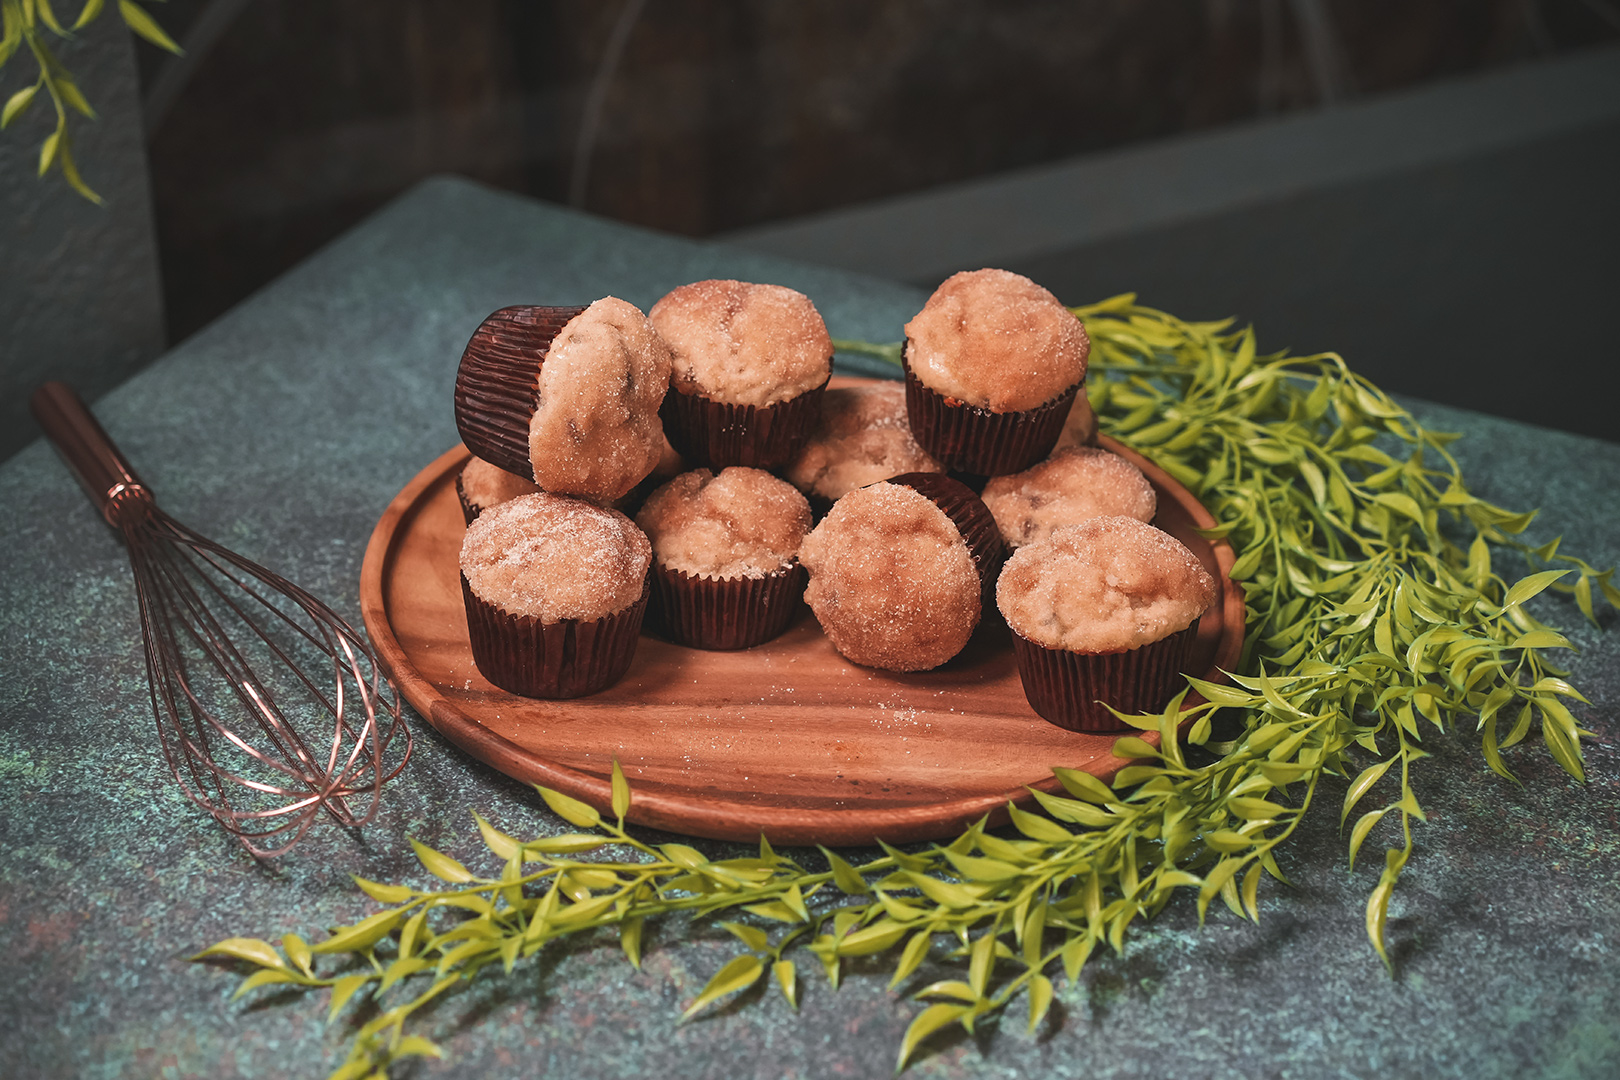 Dove's buttered muffins on a plate next to a whisk